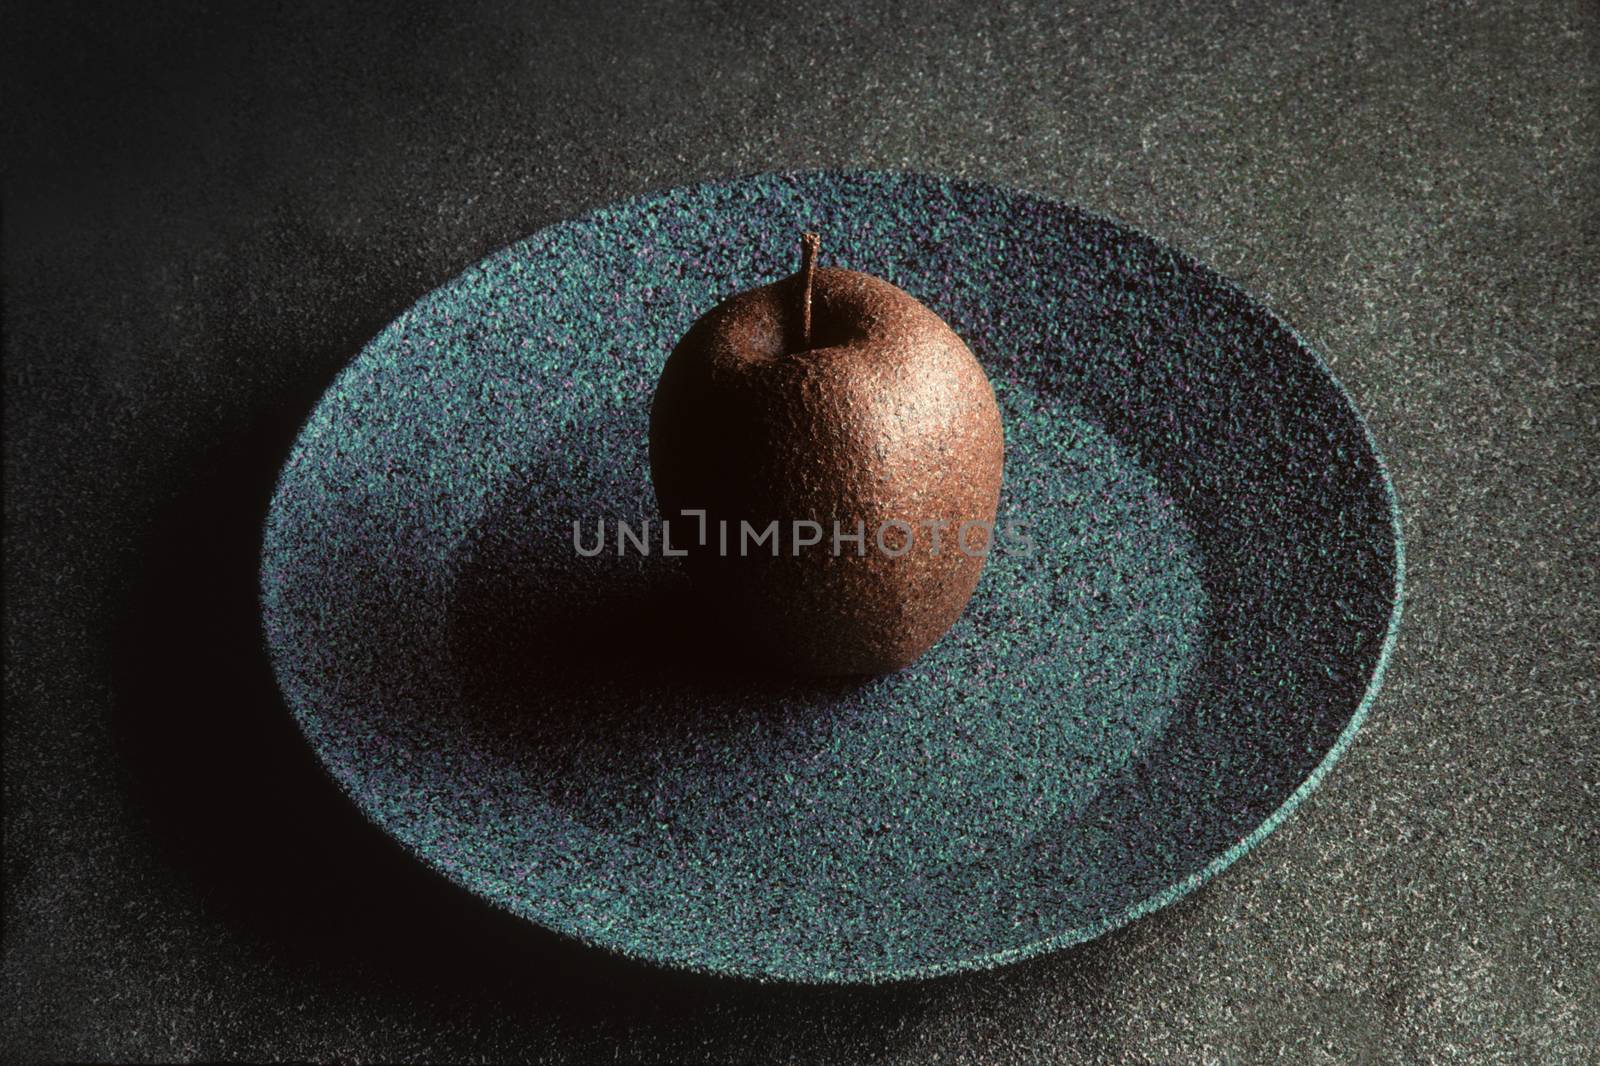 Granite-like sculpture of apple on a plate by Balefire9